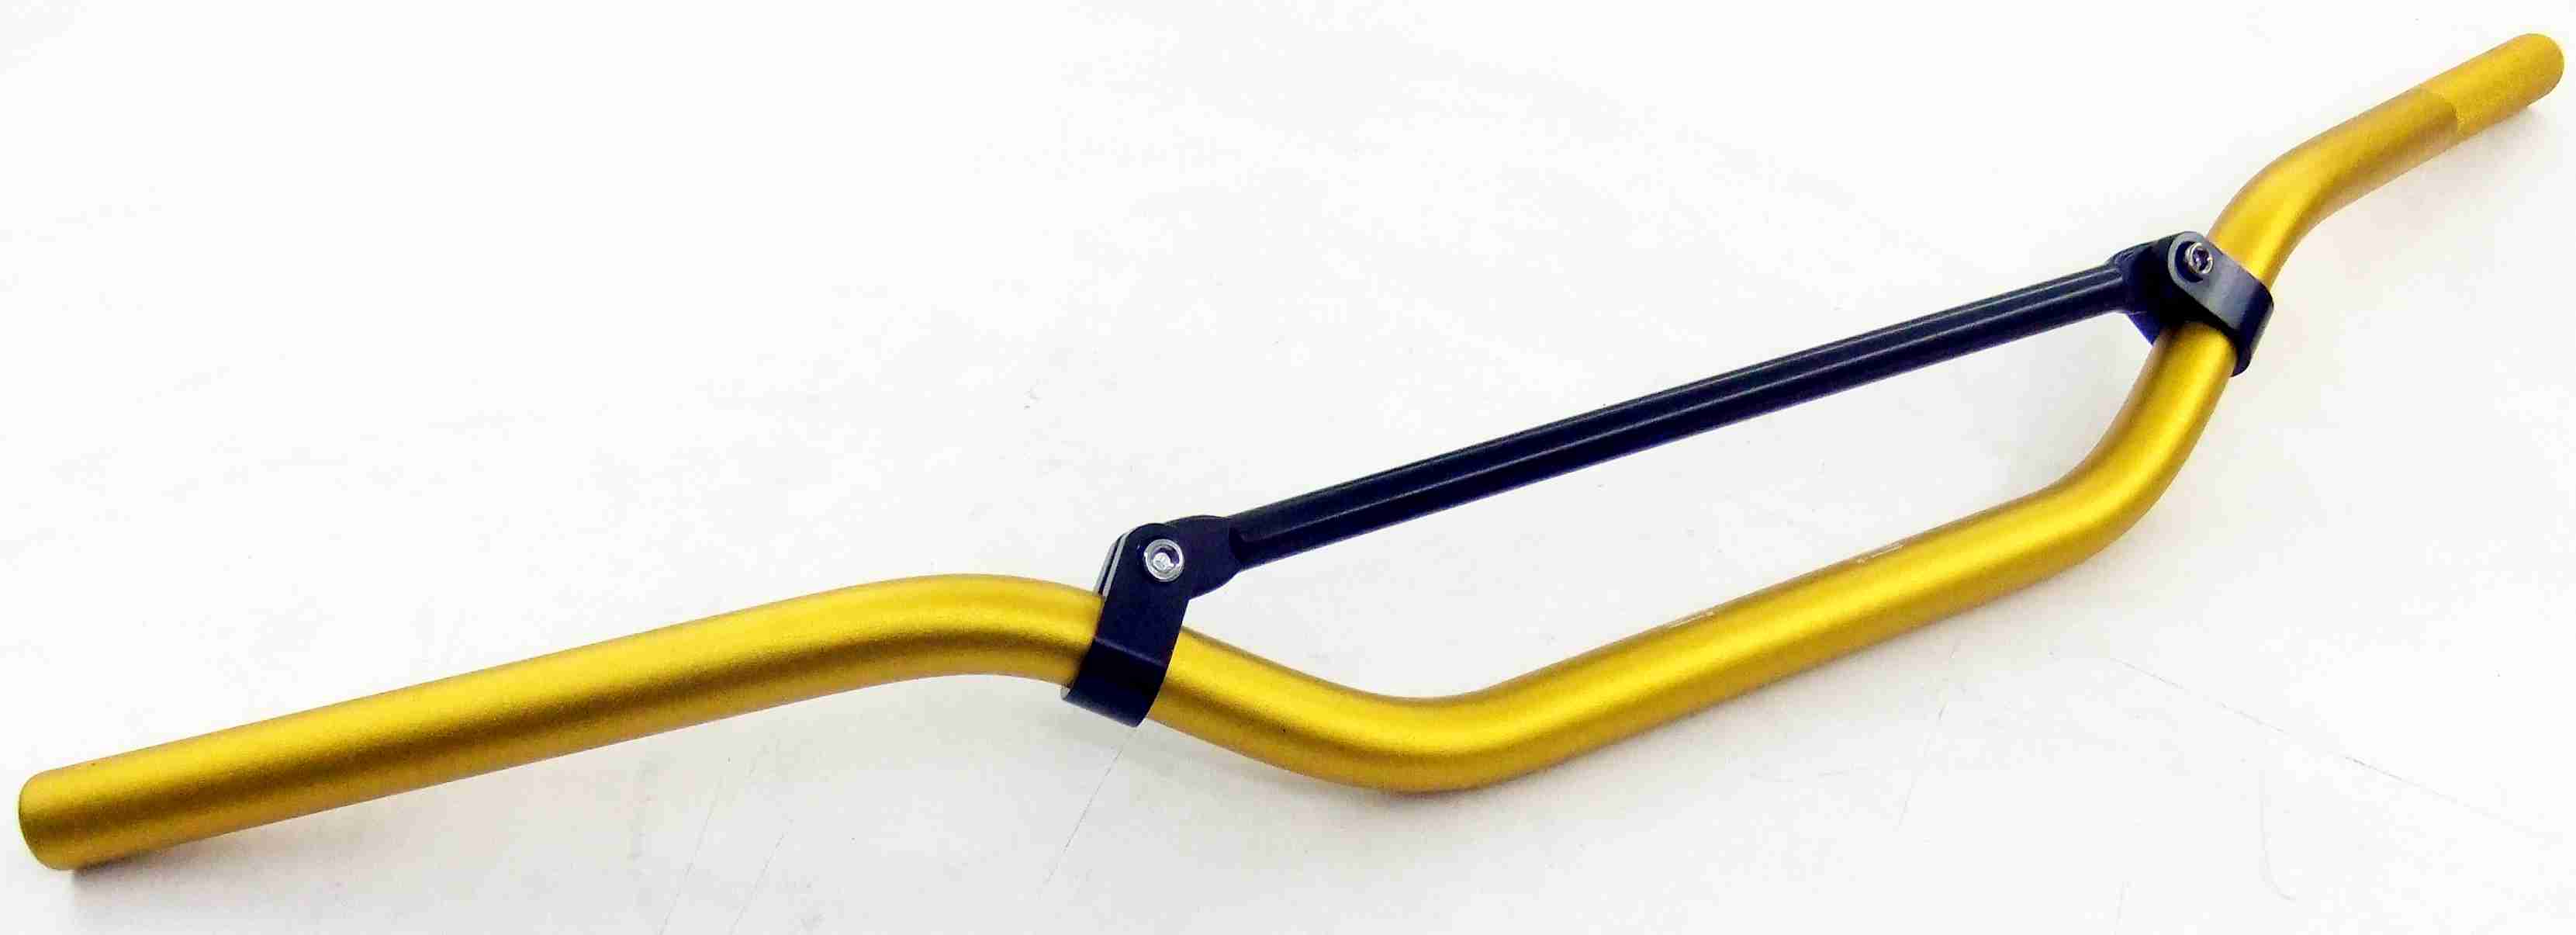 SCHREMS HANDLEBAR OFF ROAD ALU YZ 22,2 MM GOLD (DIMENSIONS SEE MORE IMAGES: A=800 / B=90 / C=60 / D=170 / E=52)